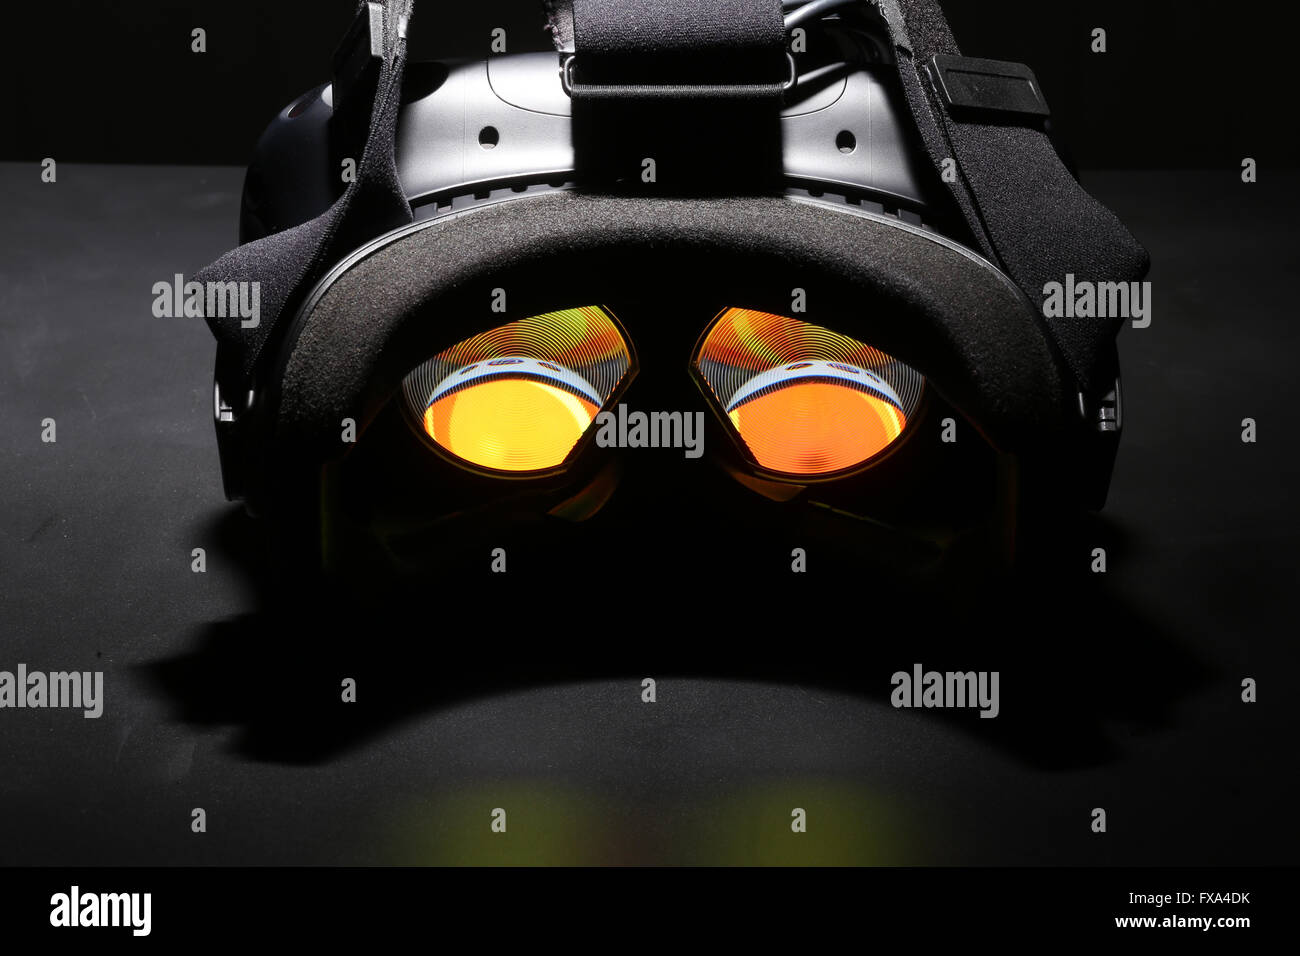 Virtual reality headset with glowing lenses Stock Photo